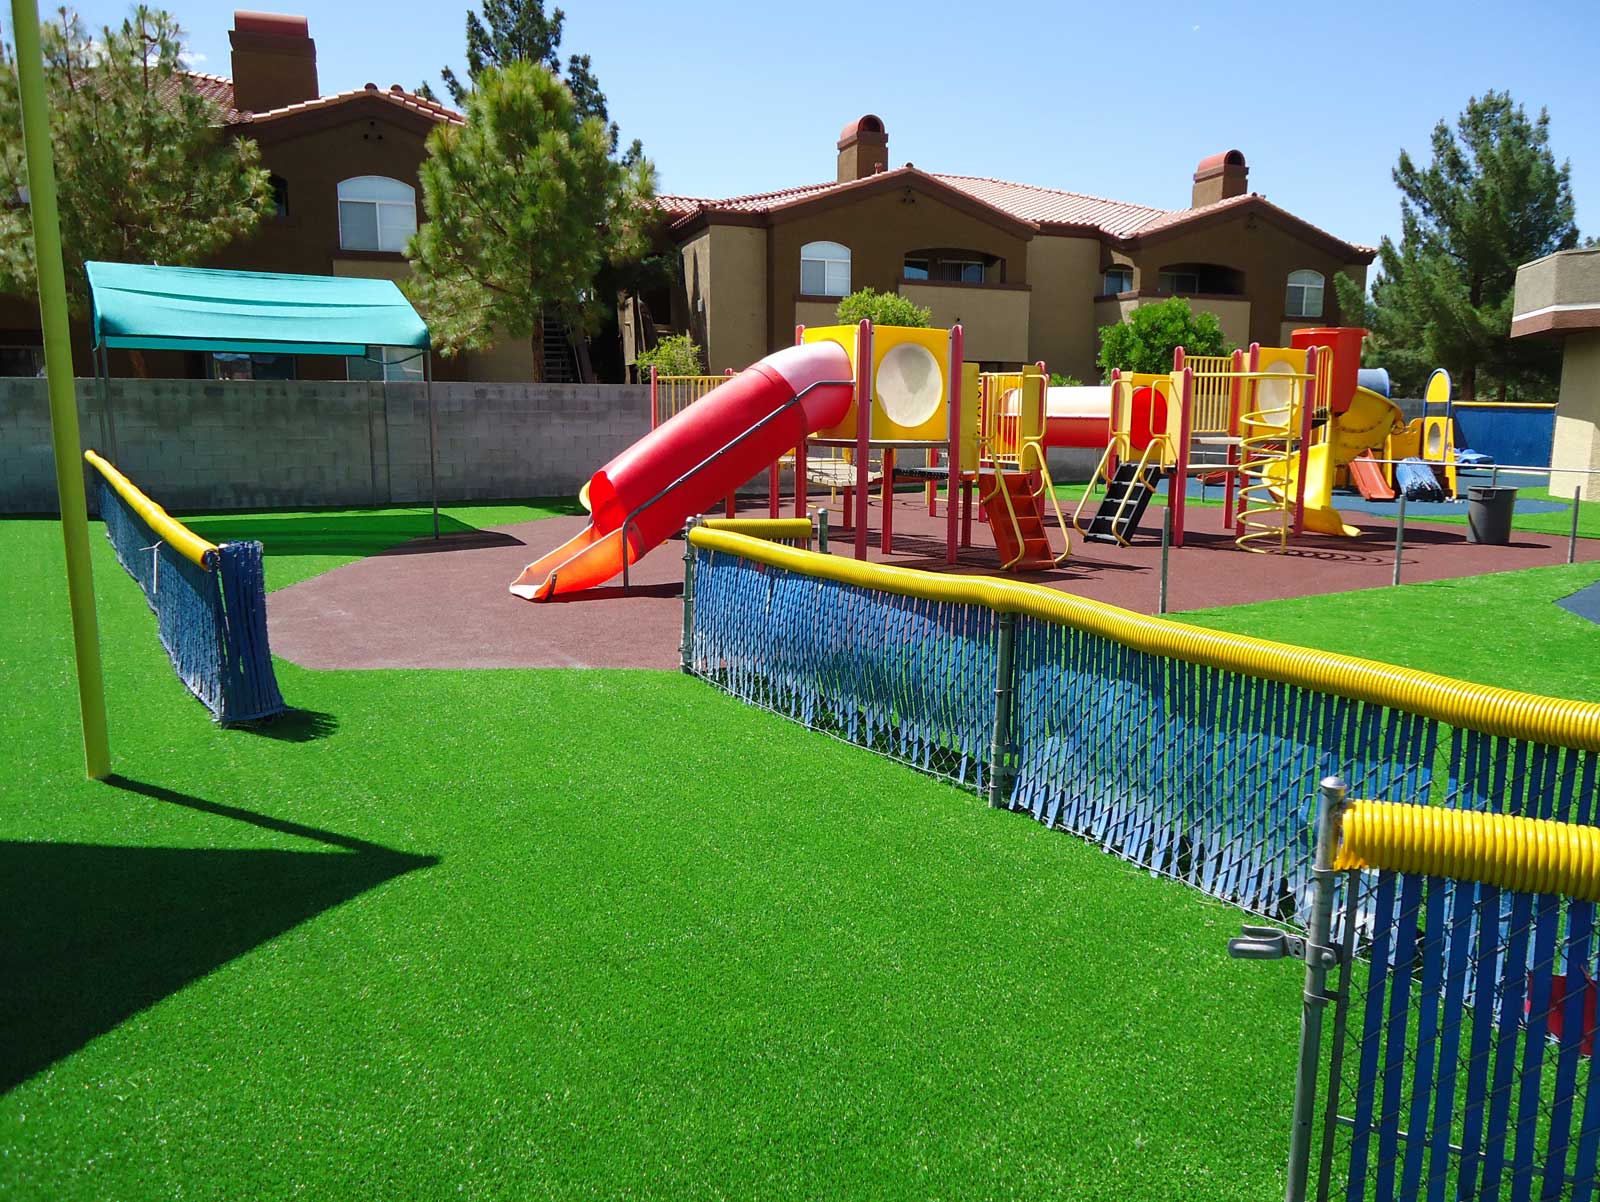 Playground surfacing or flooring, Sand, mulch, gravel, rubber, rubber tiles, mats, crumbs, artificial grass pros and cons, cost, safety, design. Green grass synthetic fake playground.